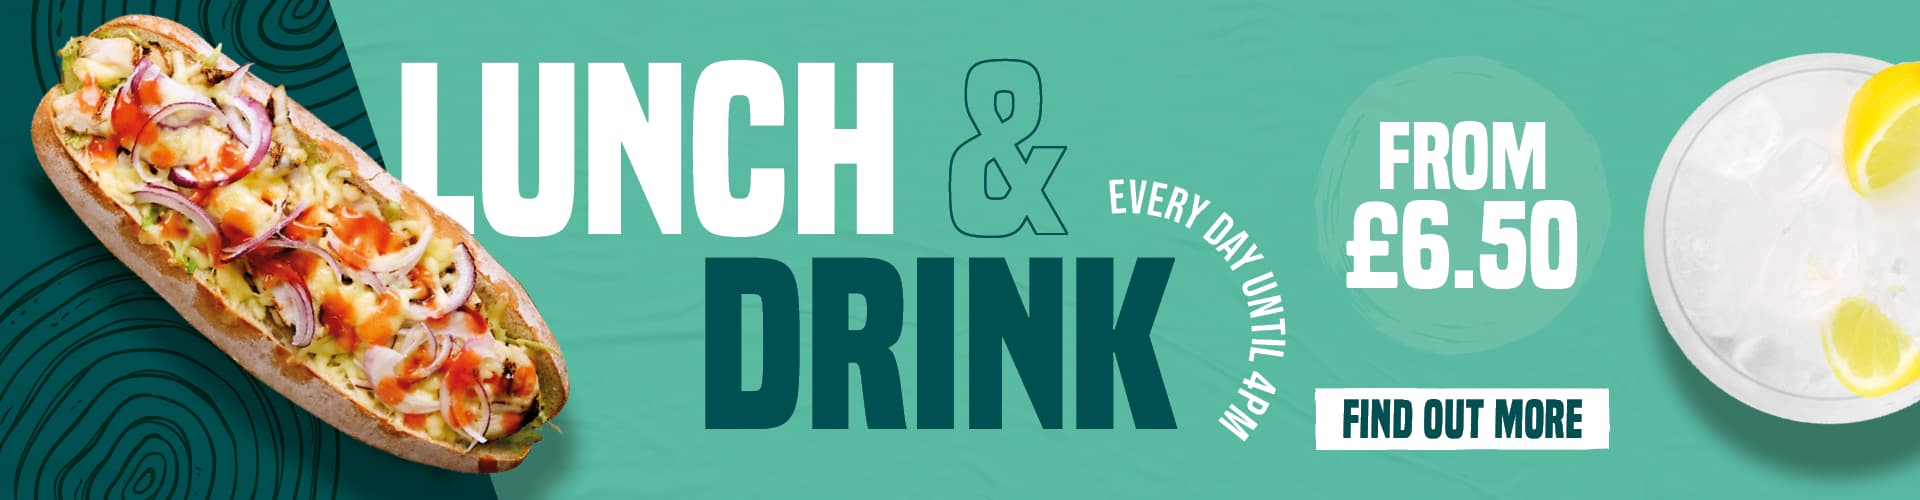 Lunch & Drink, Every Day Until 4pm, From £6.50. Find Out More.